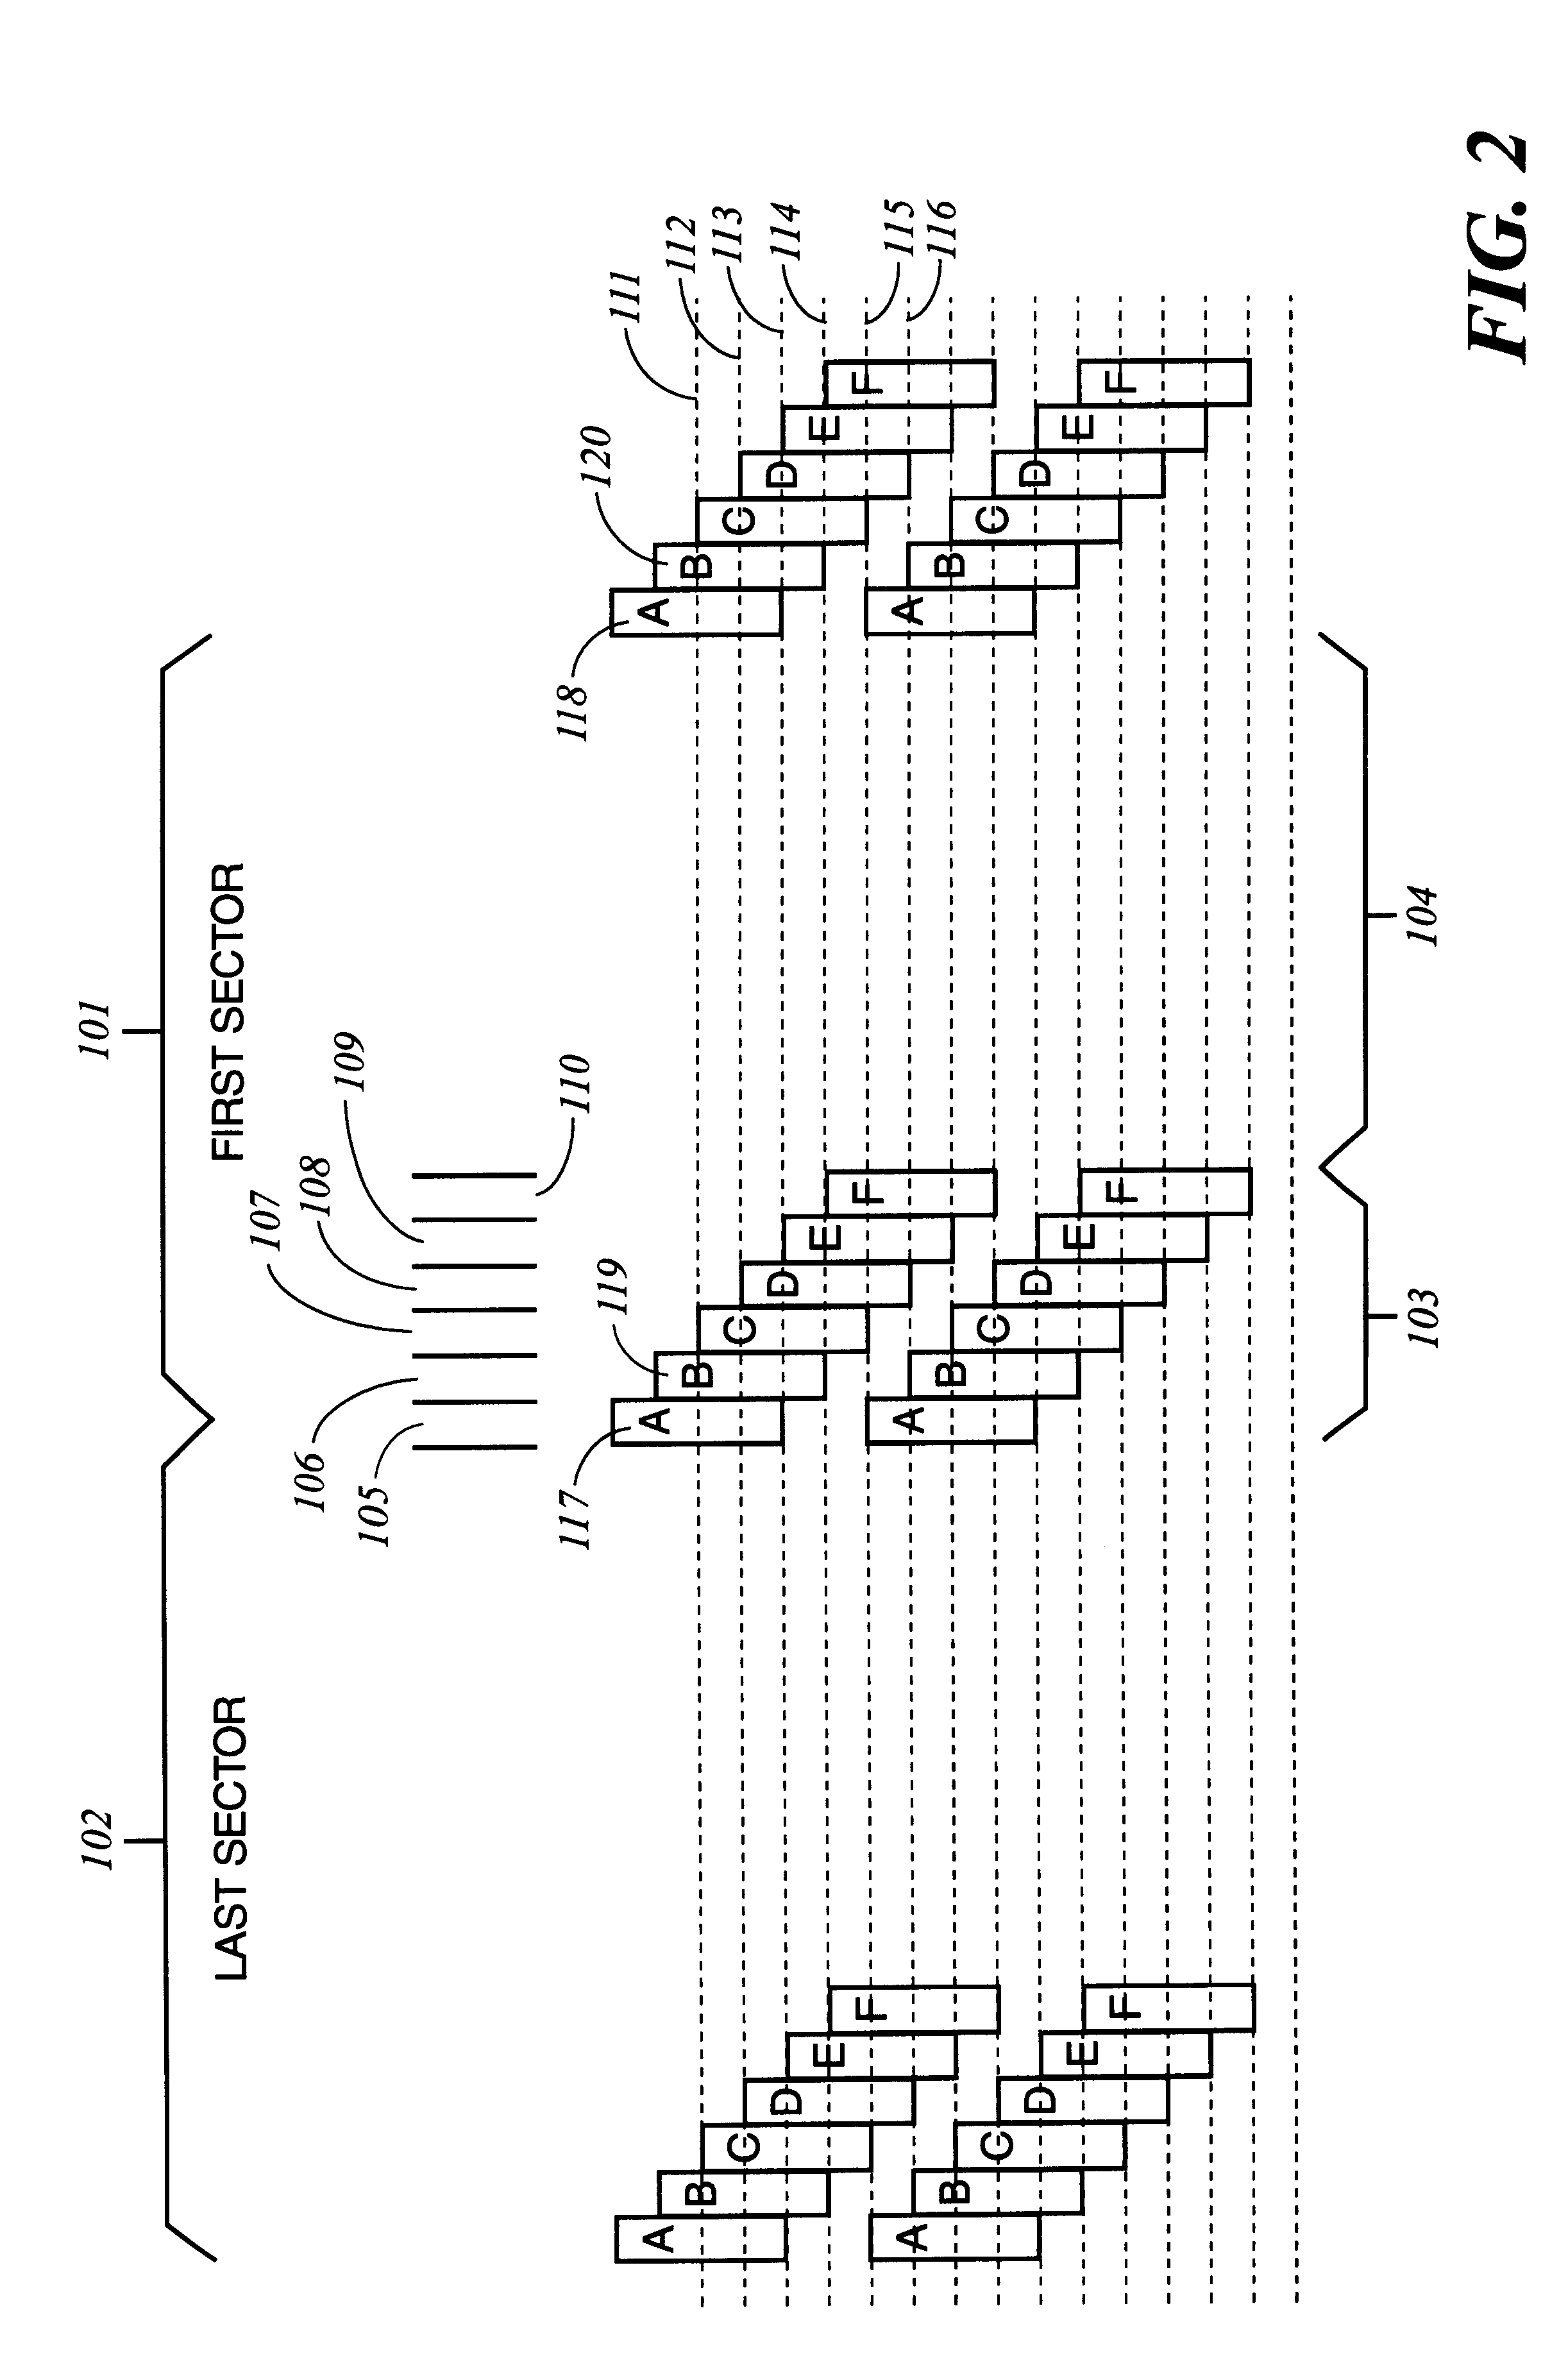 Method and apparatus for absolute track spacing determination for self-servowriting